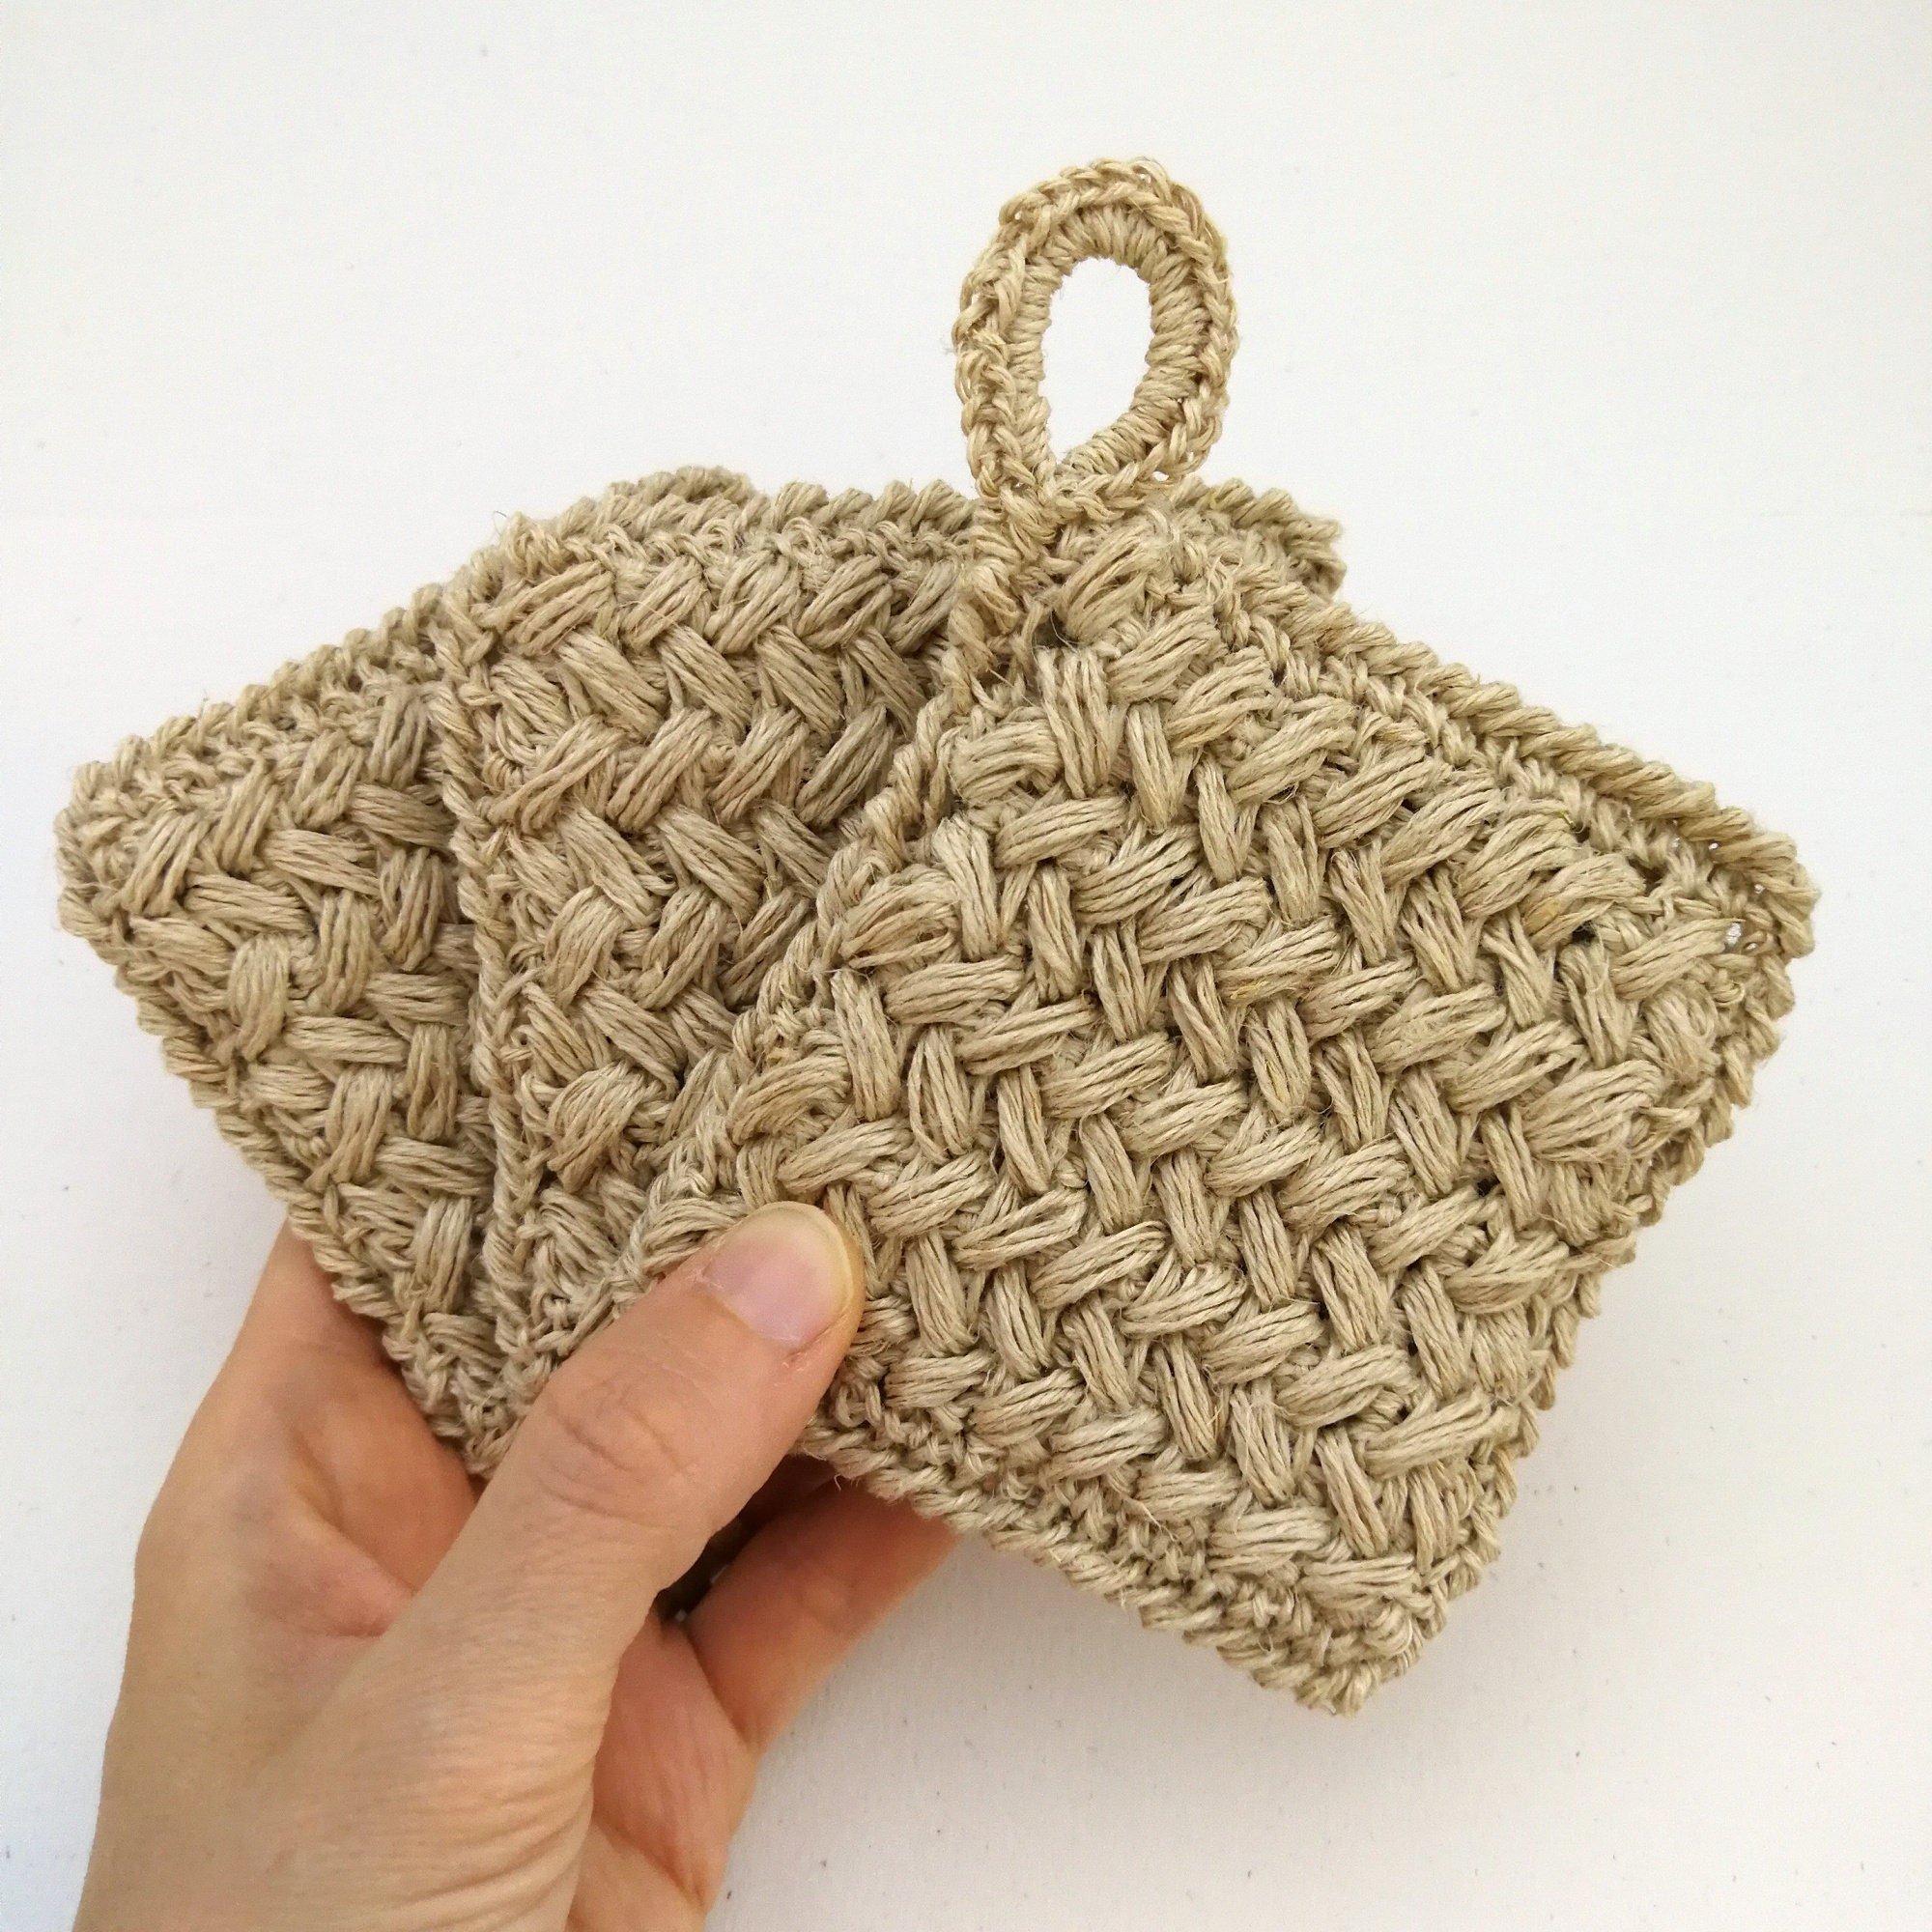 A left hand is holding 3 crochet kitchen scrubbies like a deck of cards. They have a braided type pattern. The sponge on the top has a small hanging loop on the top left.